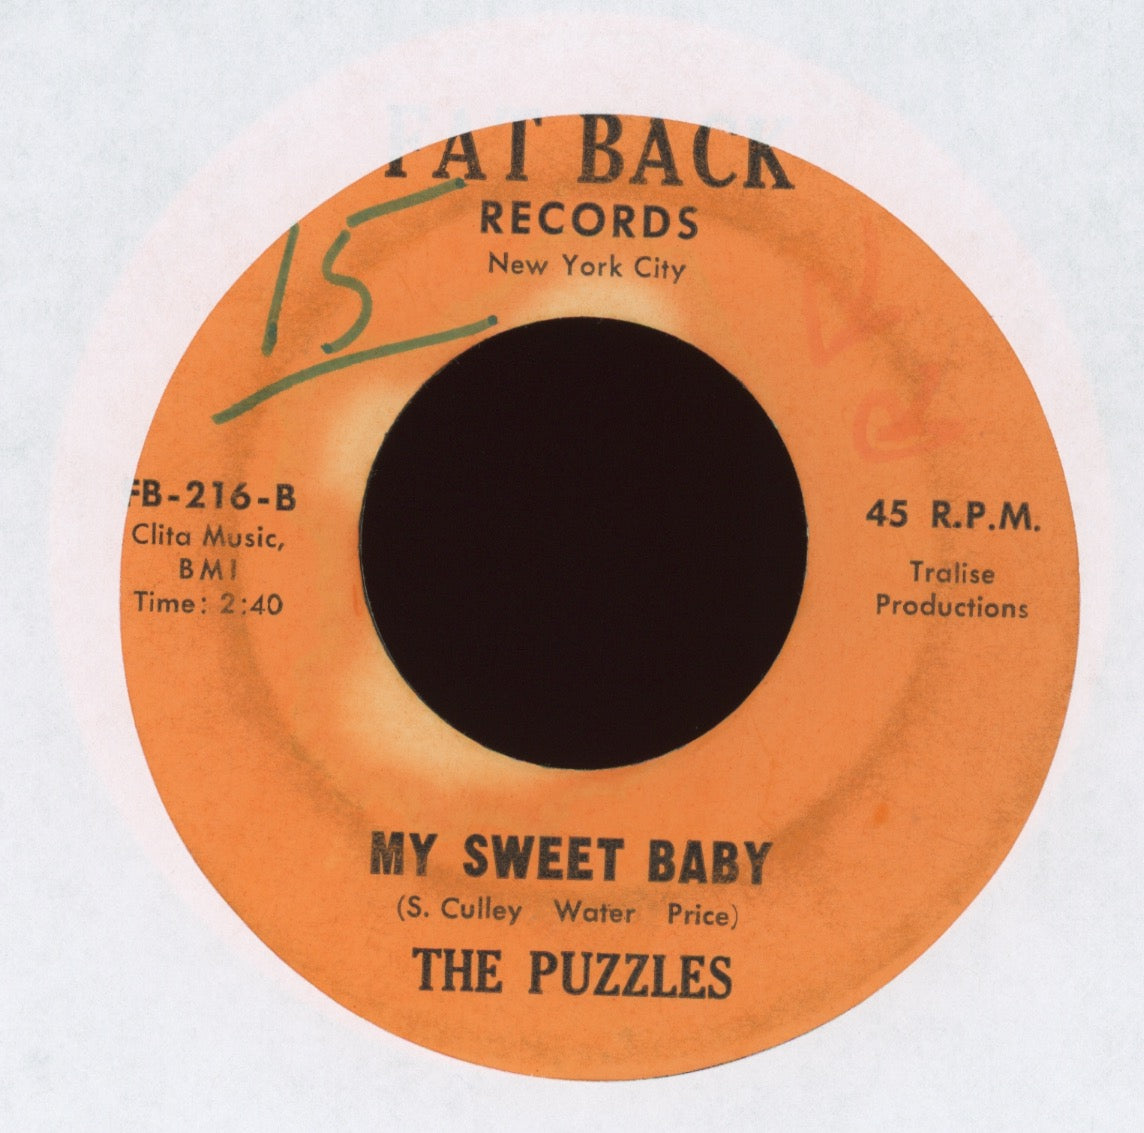 The Puzzles - I Need You on Fat Back Northern Soul 45